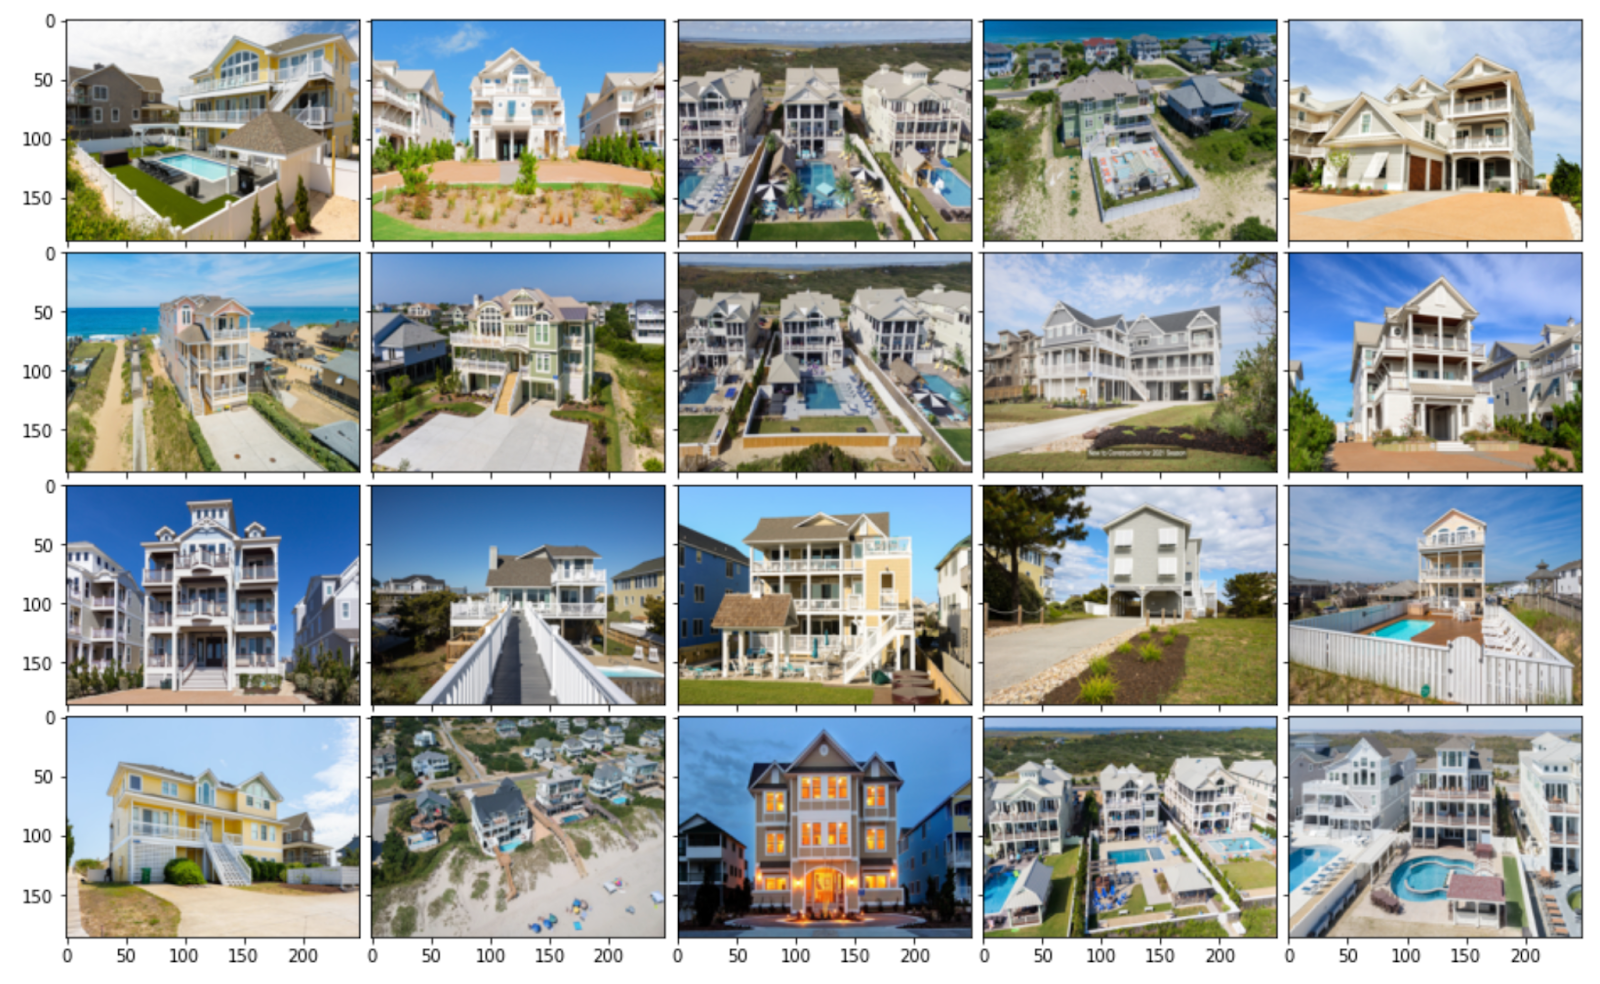 Example of a handful of images used in BigQuery prediction pipeline.